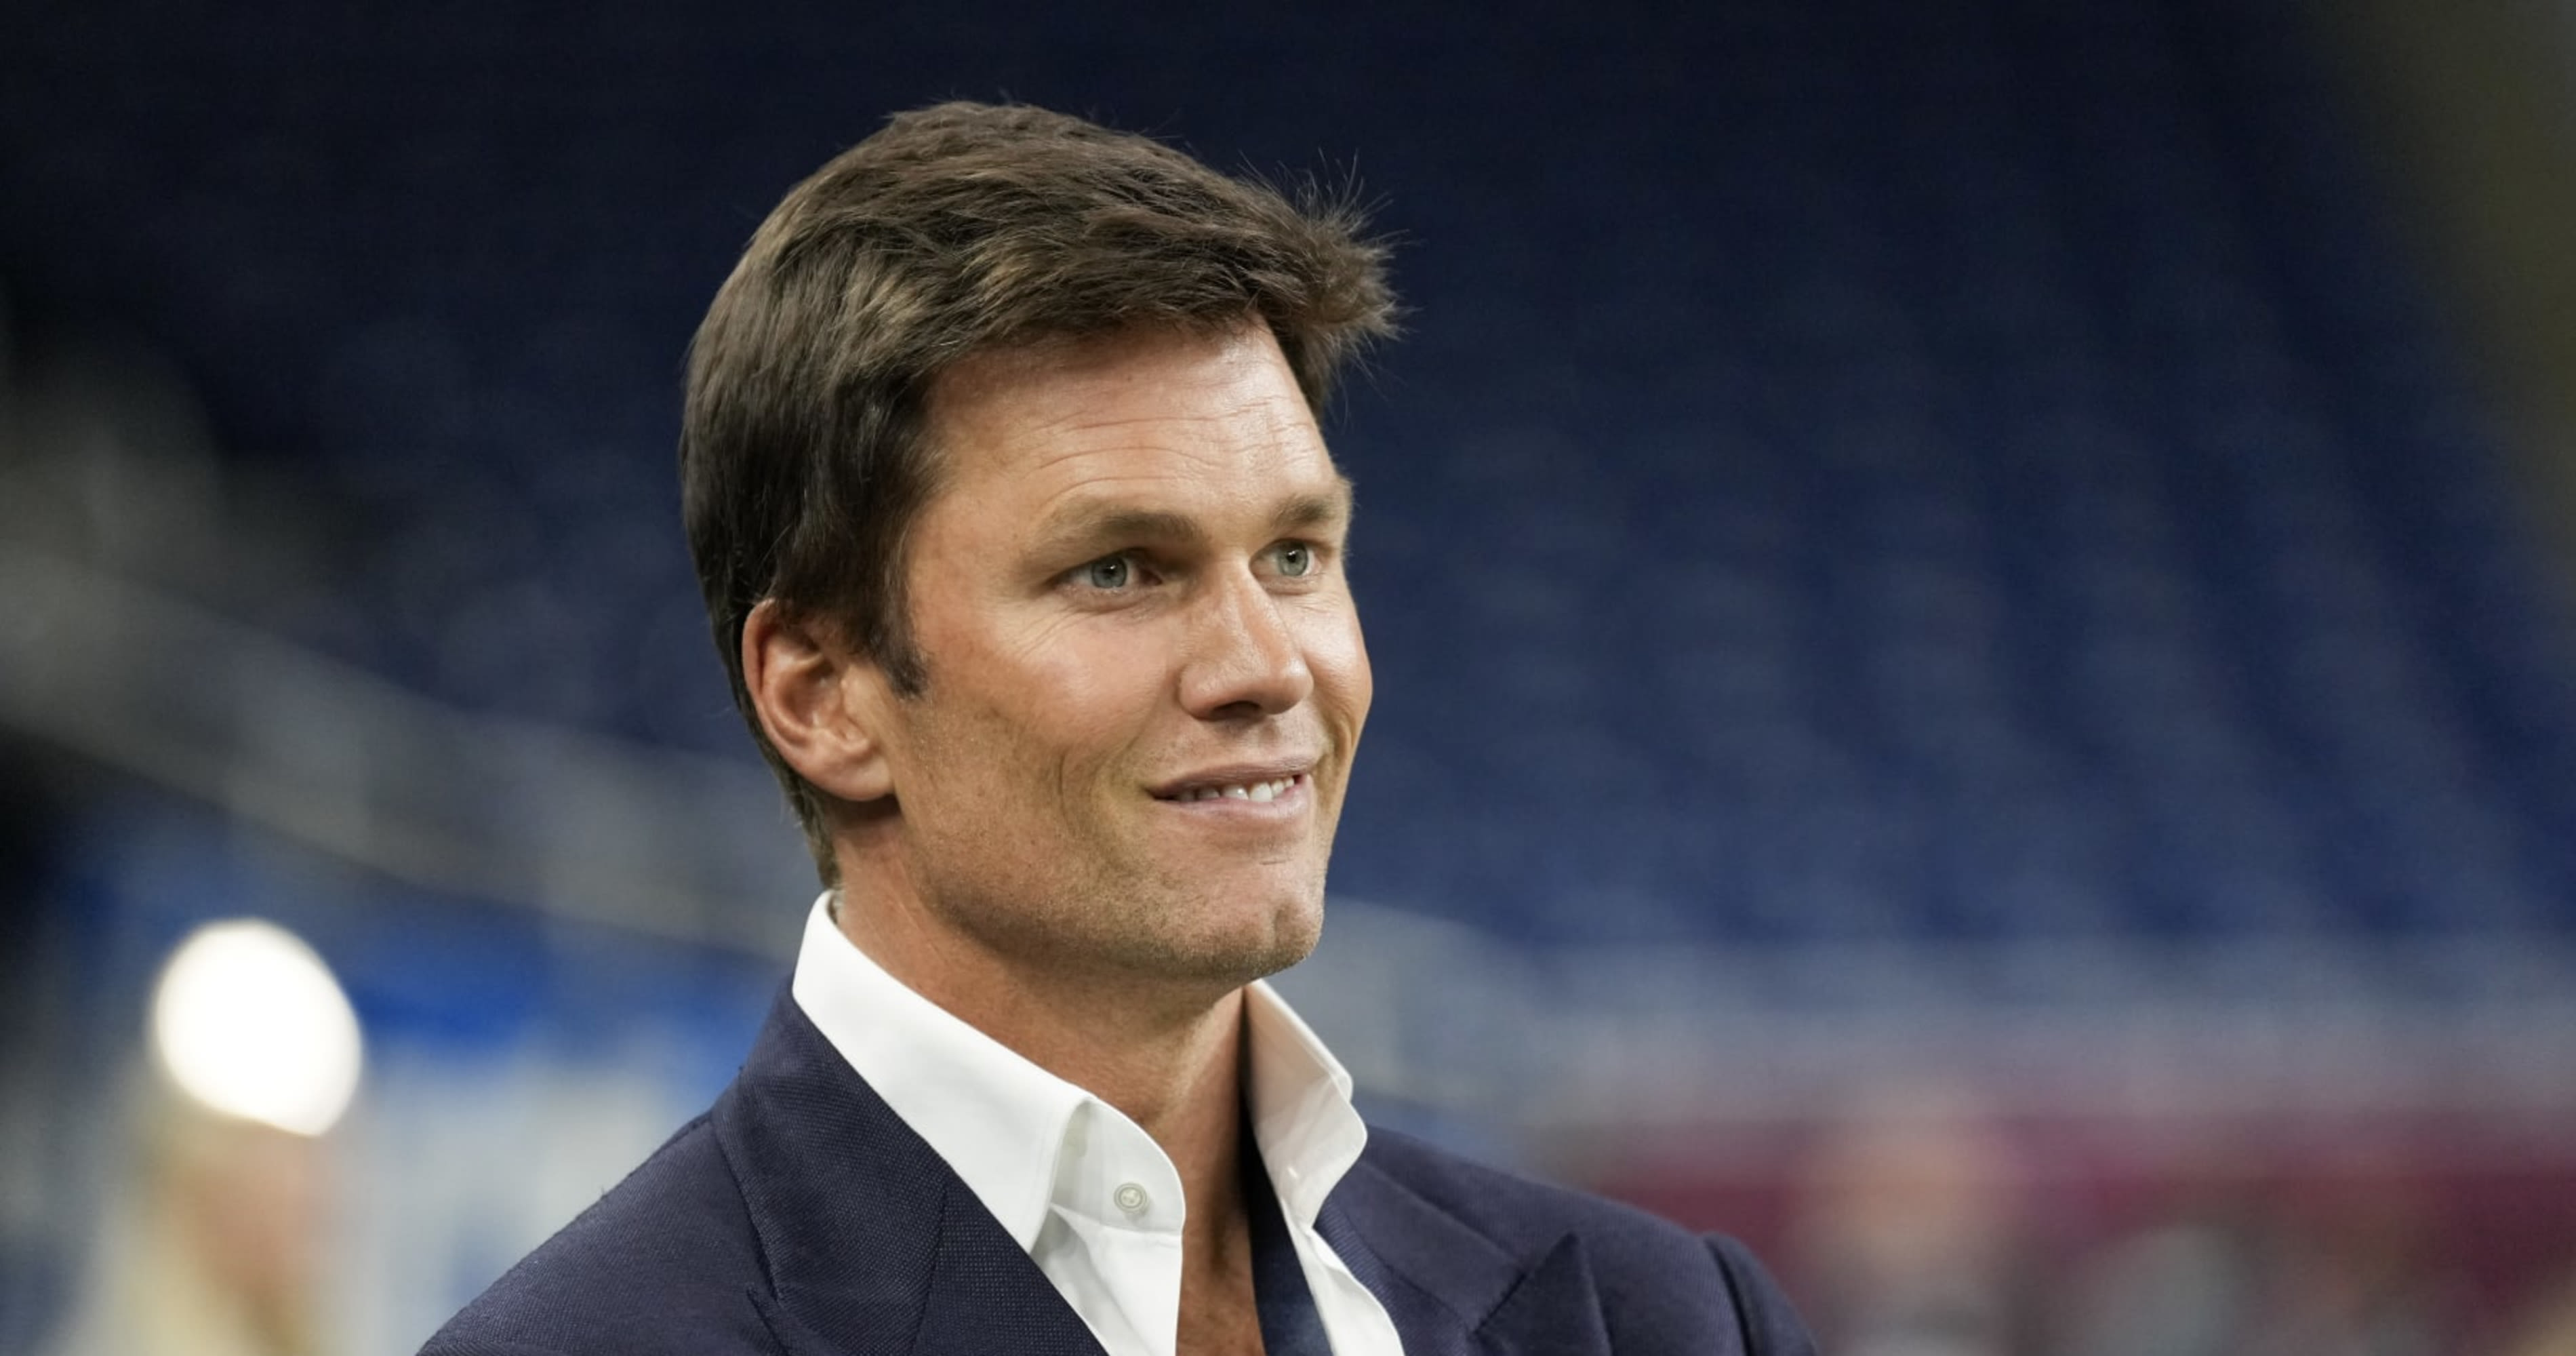 NFL Rumors: Tom Brady's Raiders Ownership Opposed by Some Teams Due to Fox Role